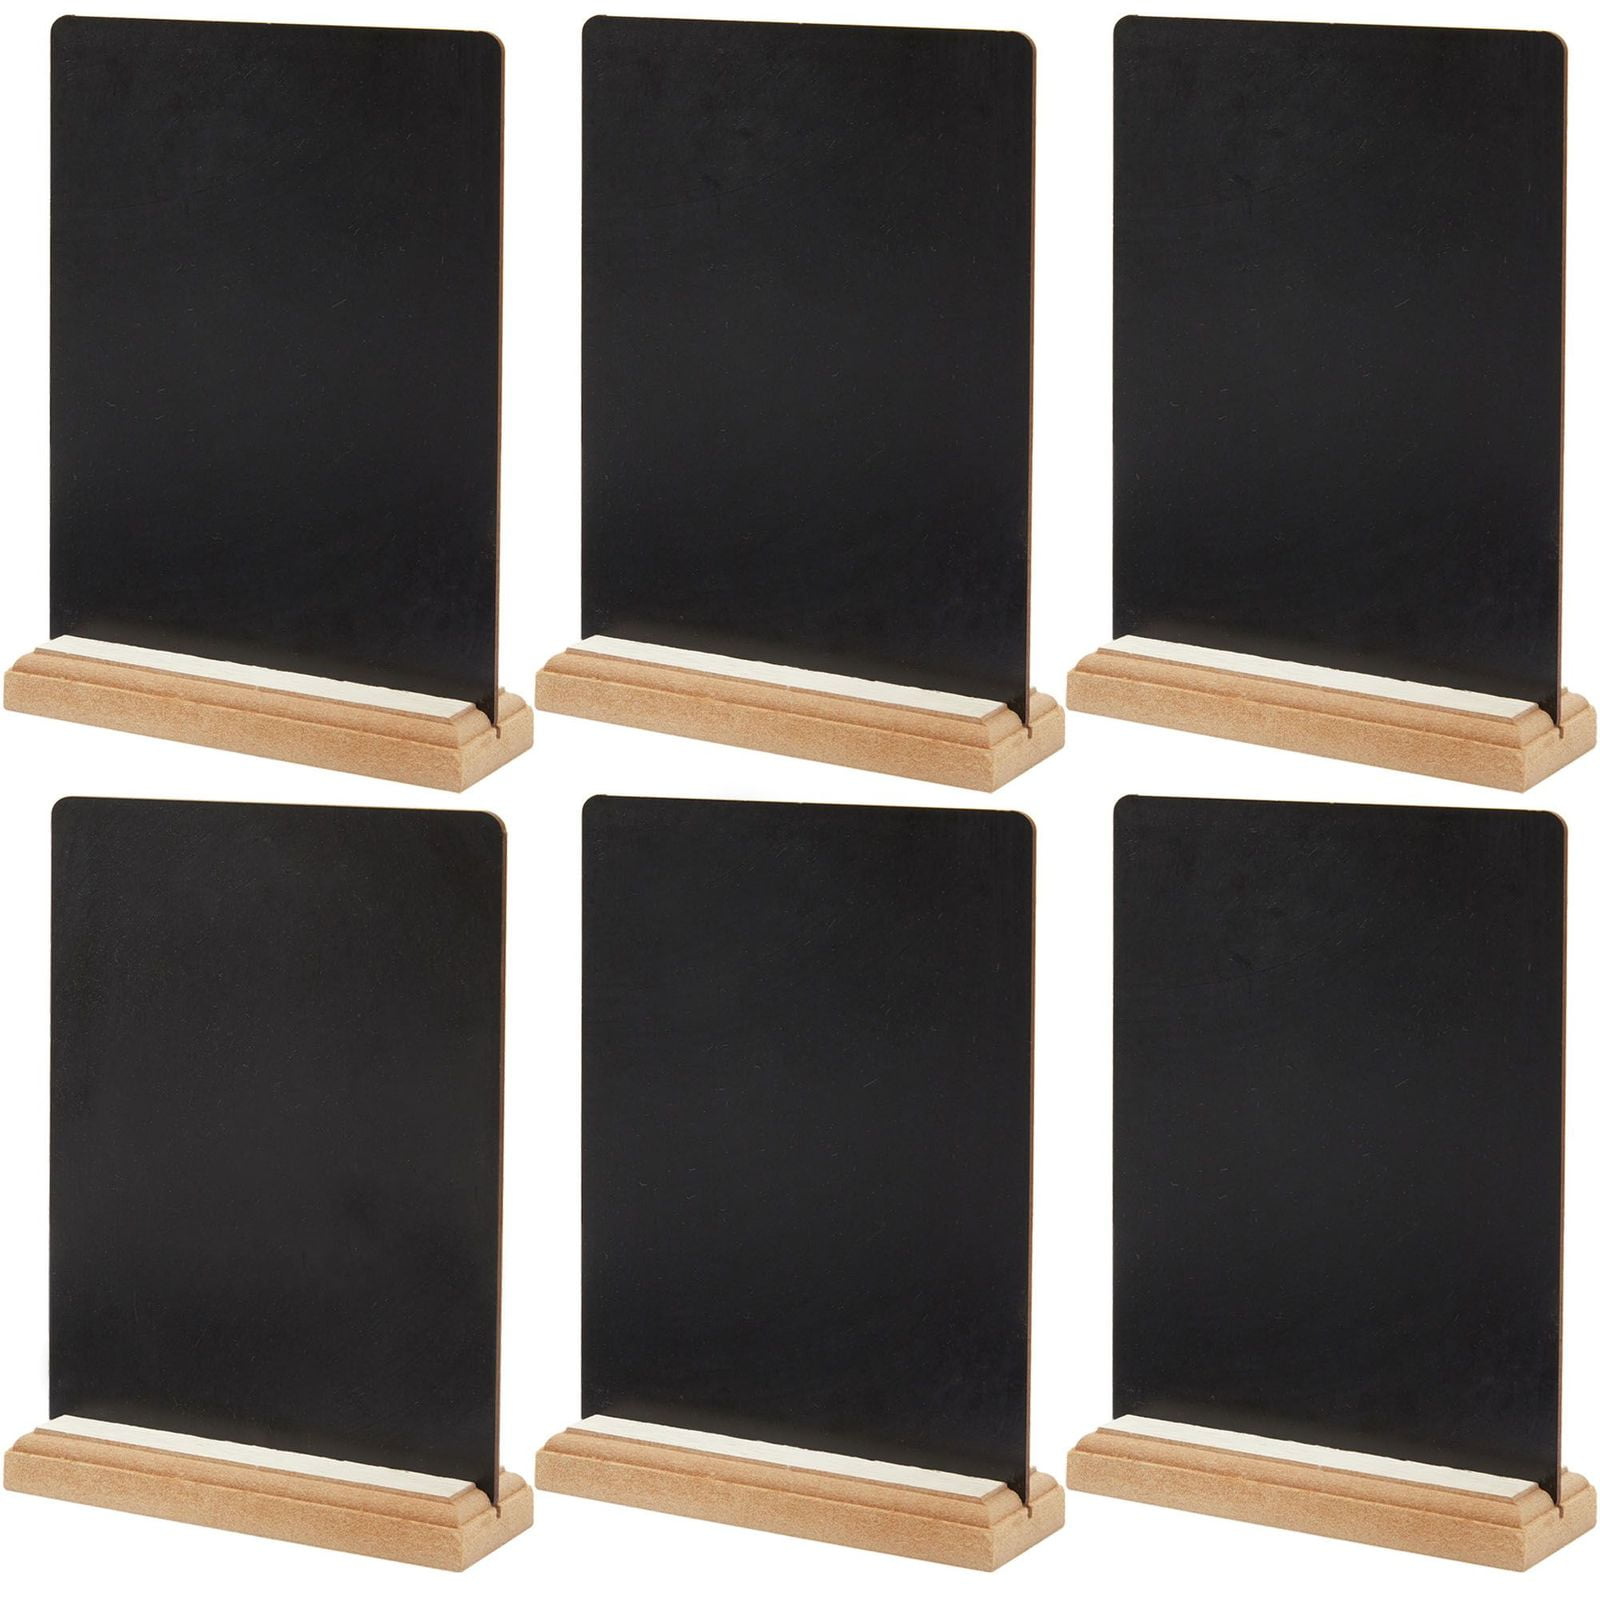 100×Mini Wooden Blackboard Sign Table Number Message Memo Chalk Board with Stand 